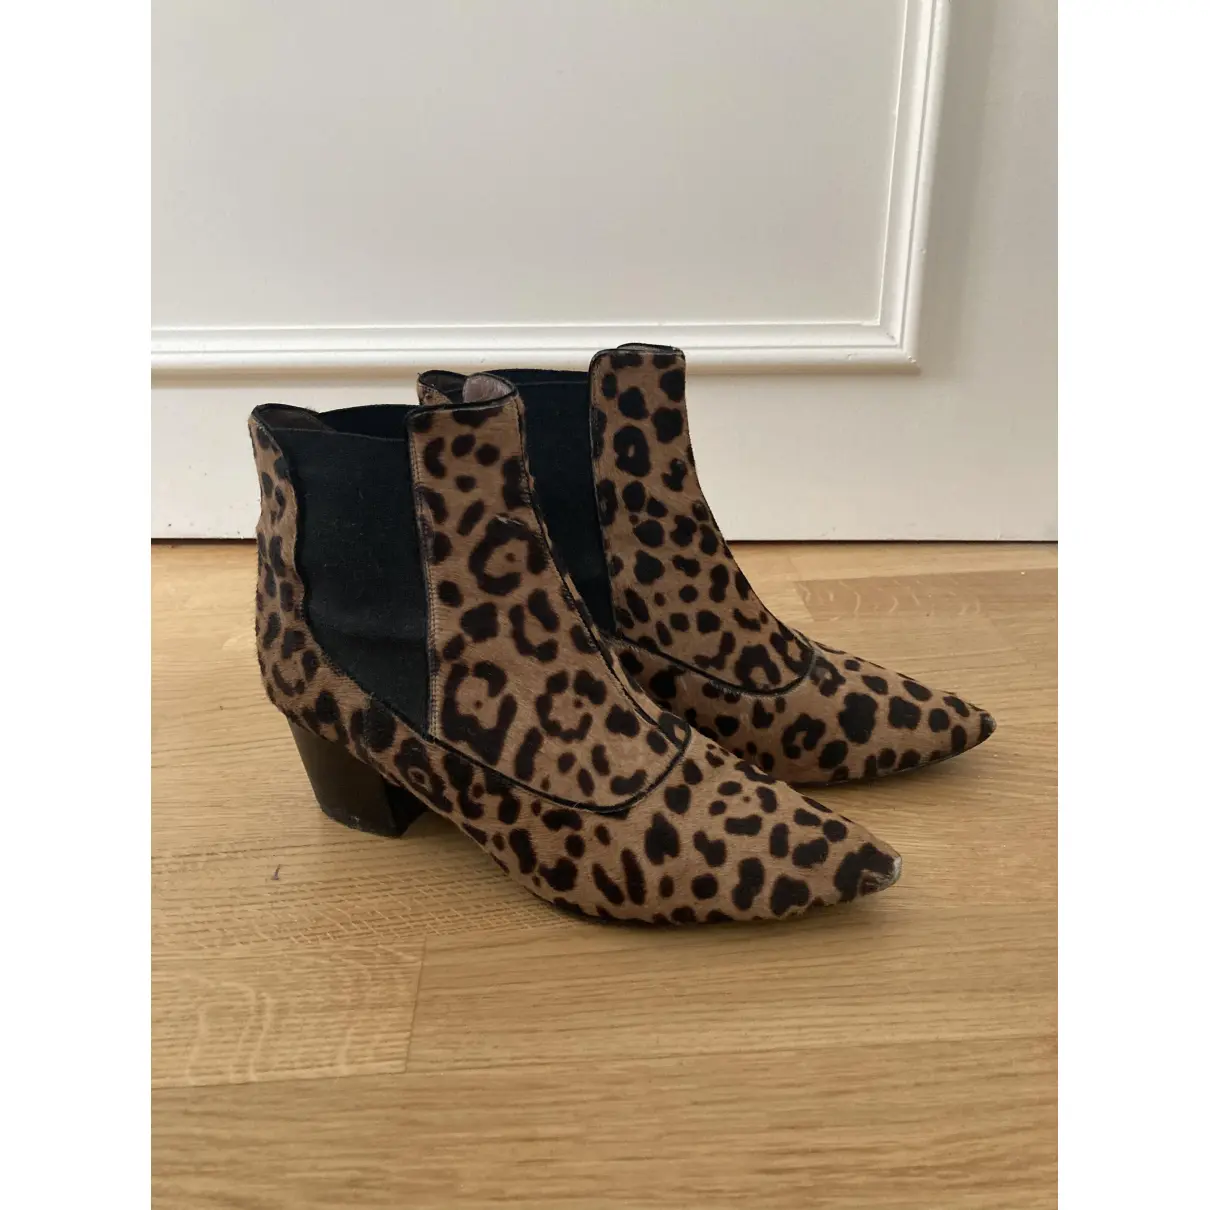 Buy Tabitha Simmons Pony-style calfskin ankle boots online